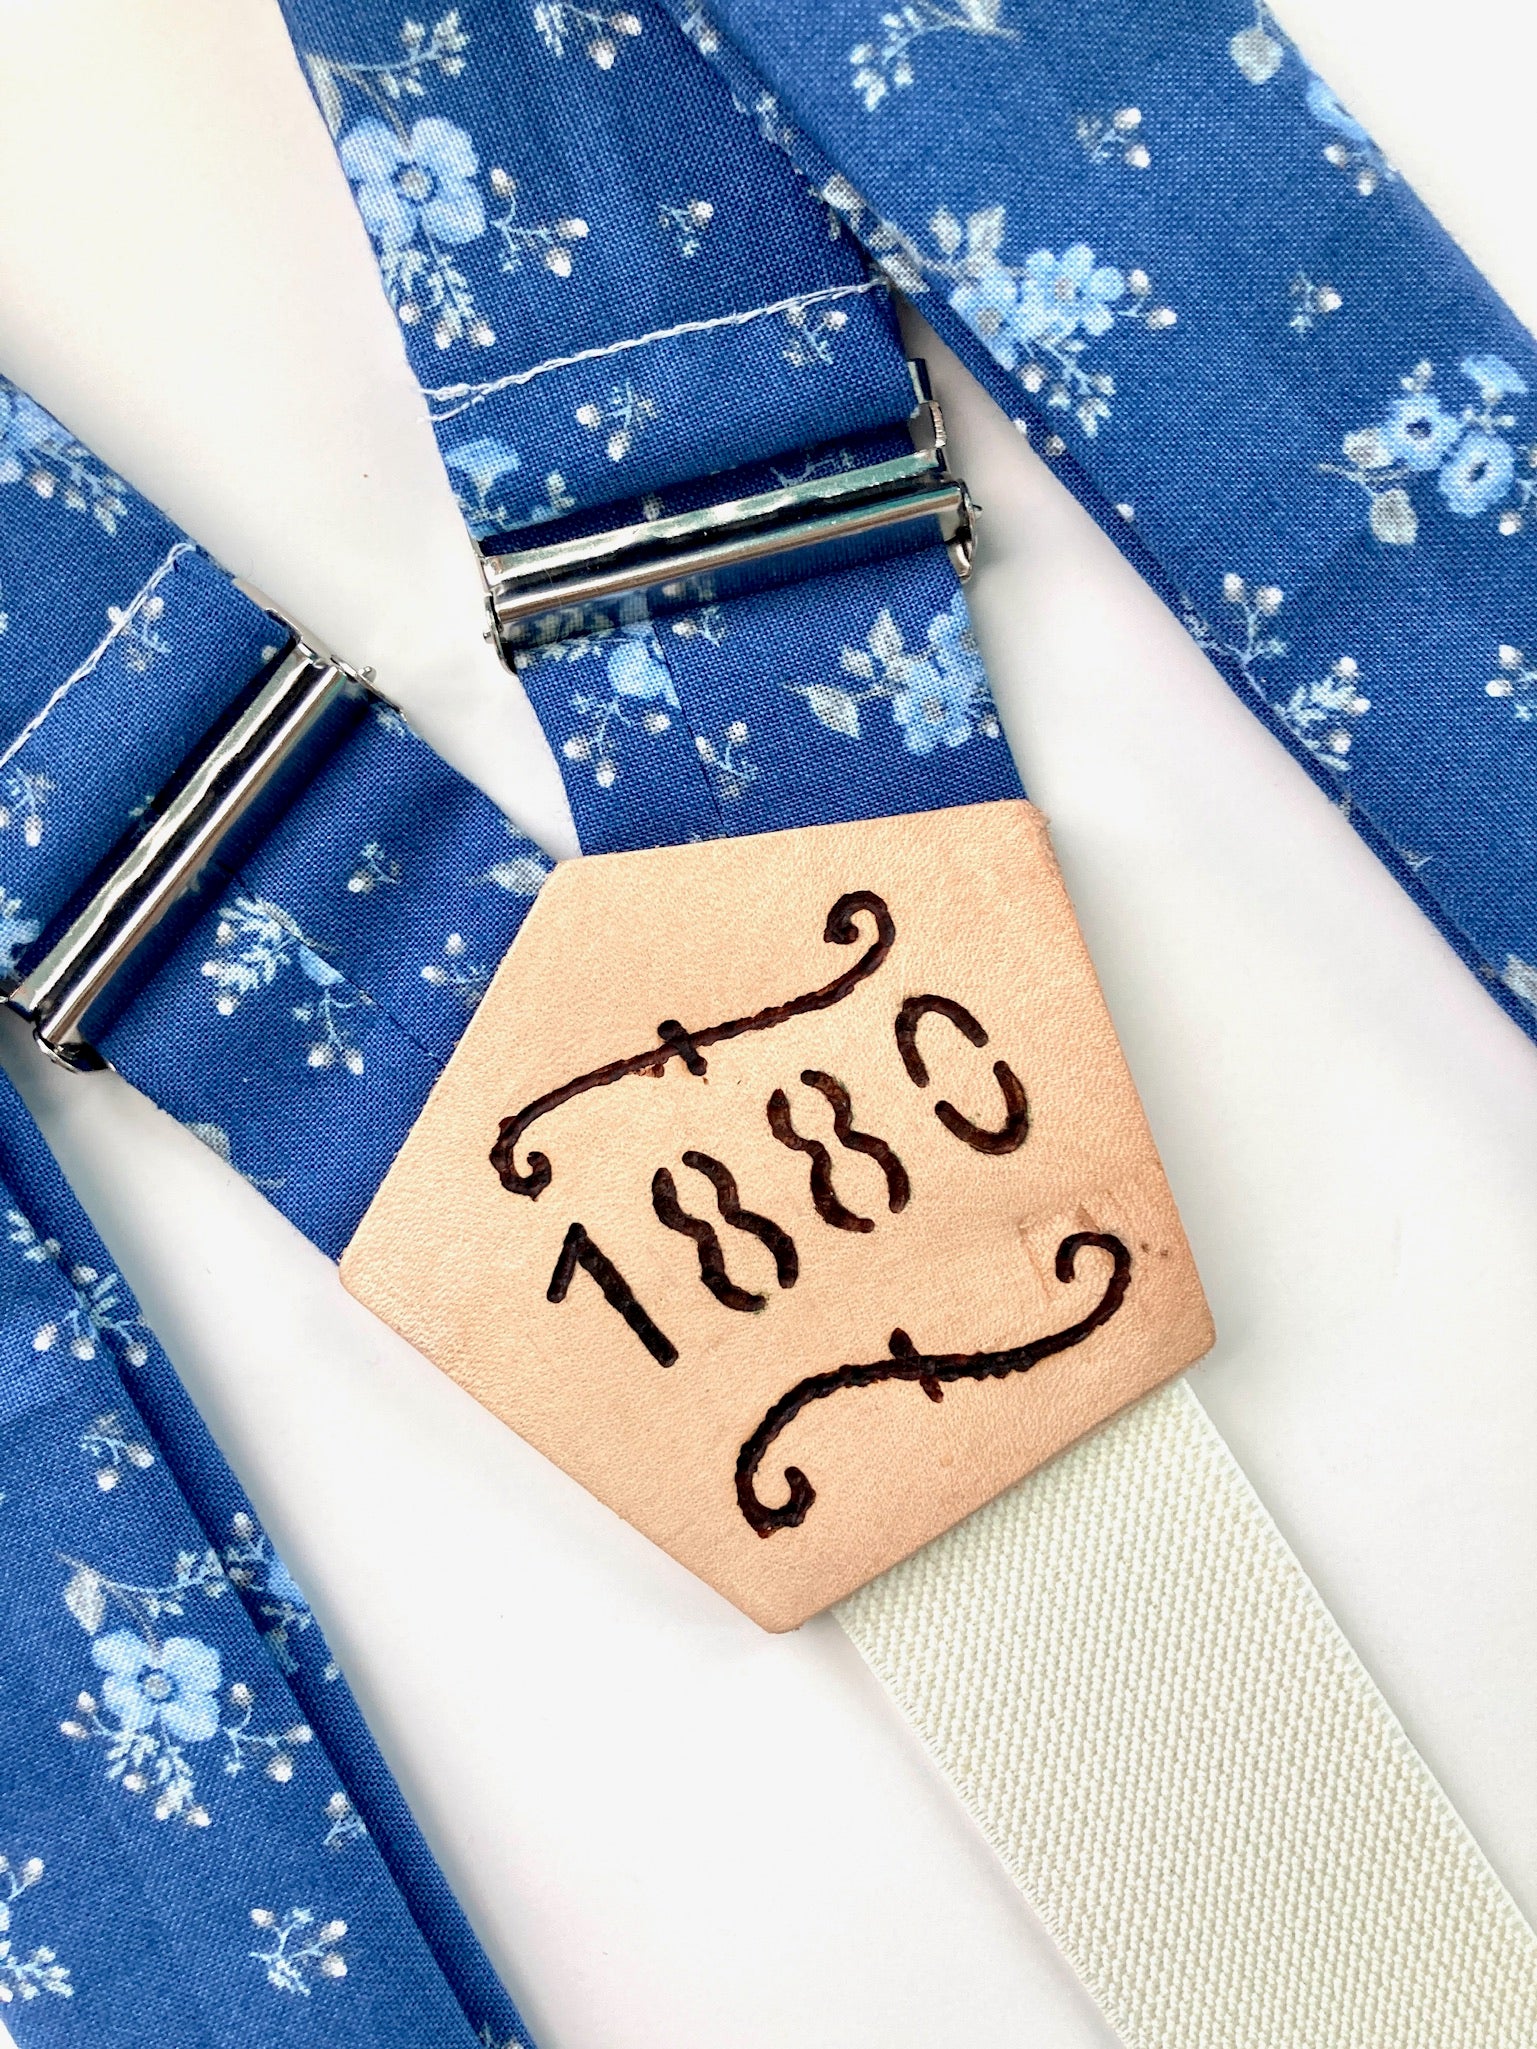 Stratton Suspenders Blue Floral Straps of the Limited Edition 1880 Vintage Collection